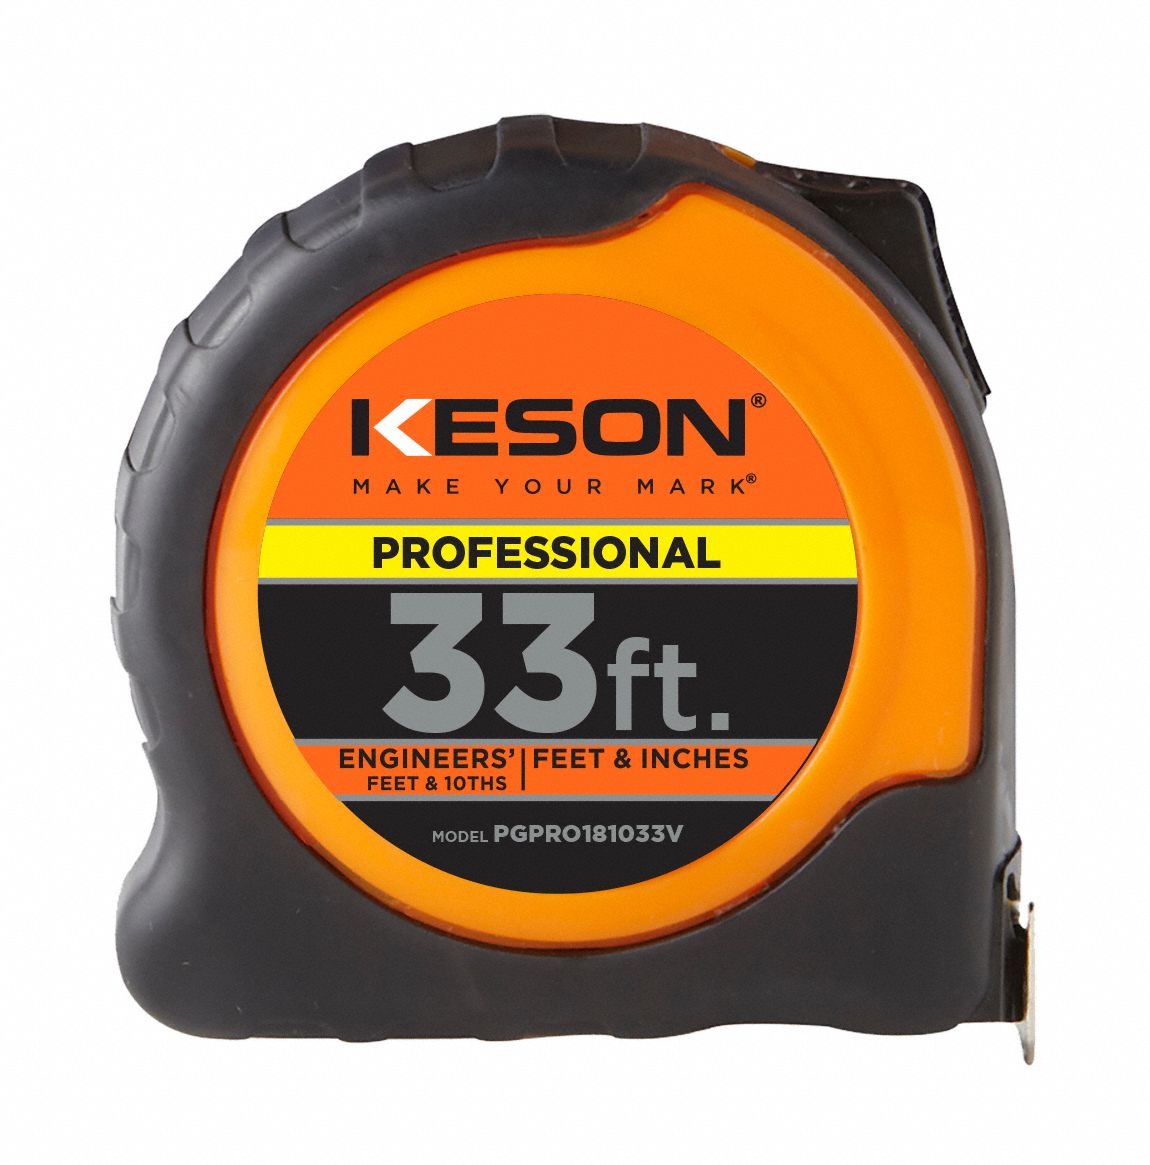 Keson 33ft Engineers and SAE Measuring Tape - Utility and Pocket Knives